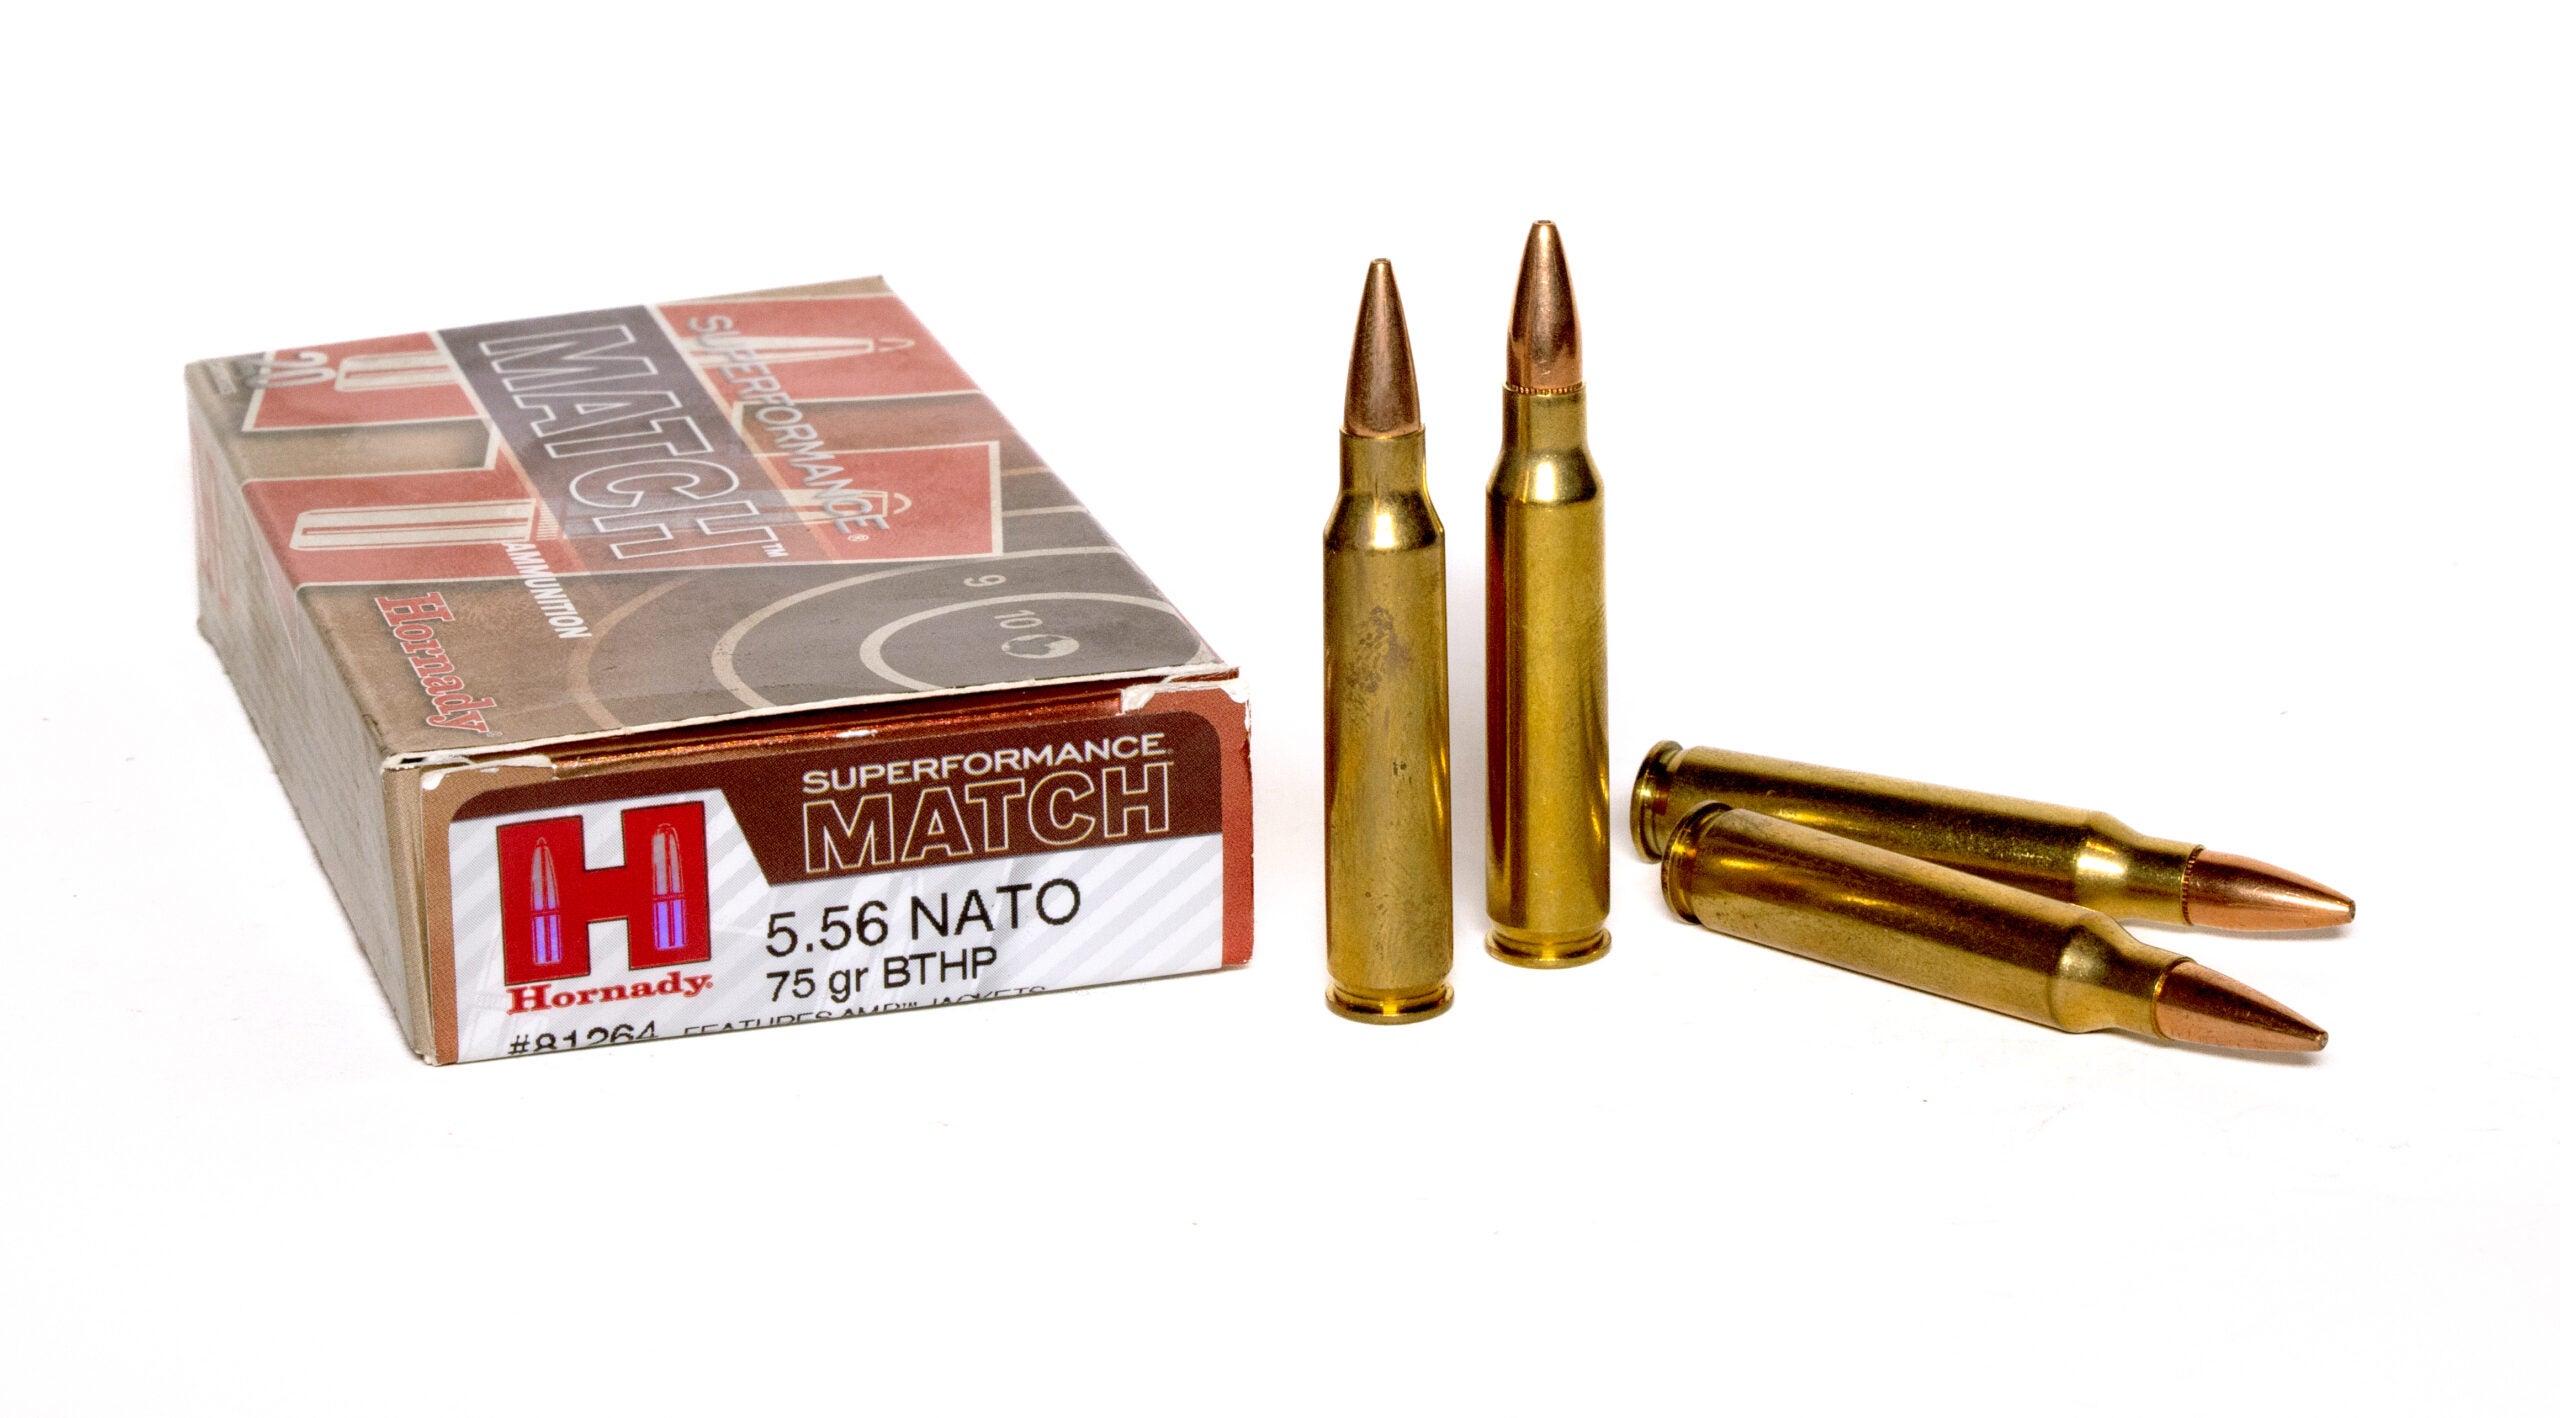 A box of 556 Nato ammo on a white table with four cartridges next to it.